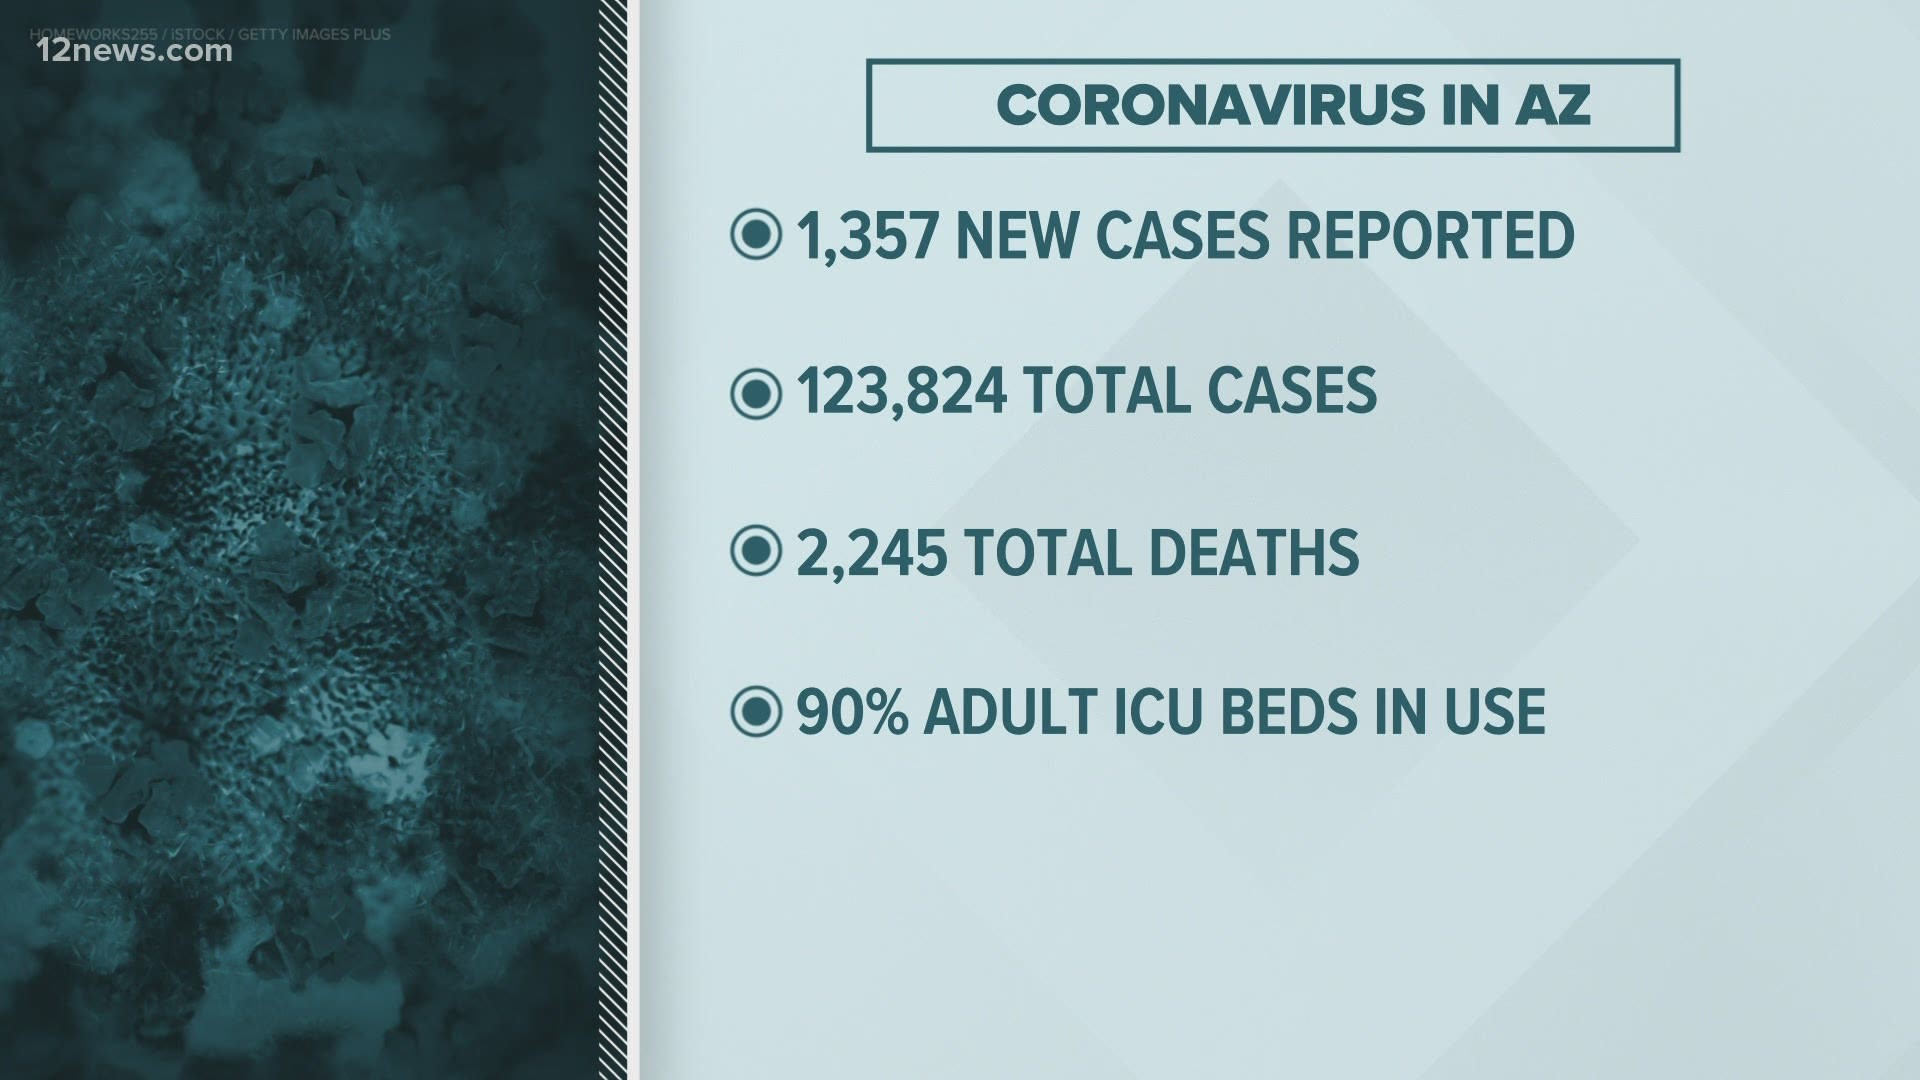 More than 1,300 new cases of coronavirus in Arizona were reported Monday morning. Coronavirus-related deaths have risen to 2,245.